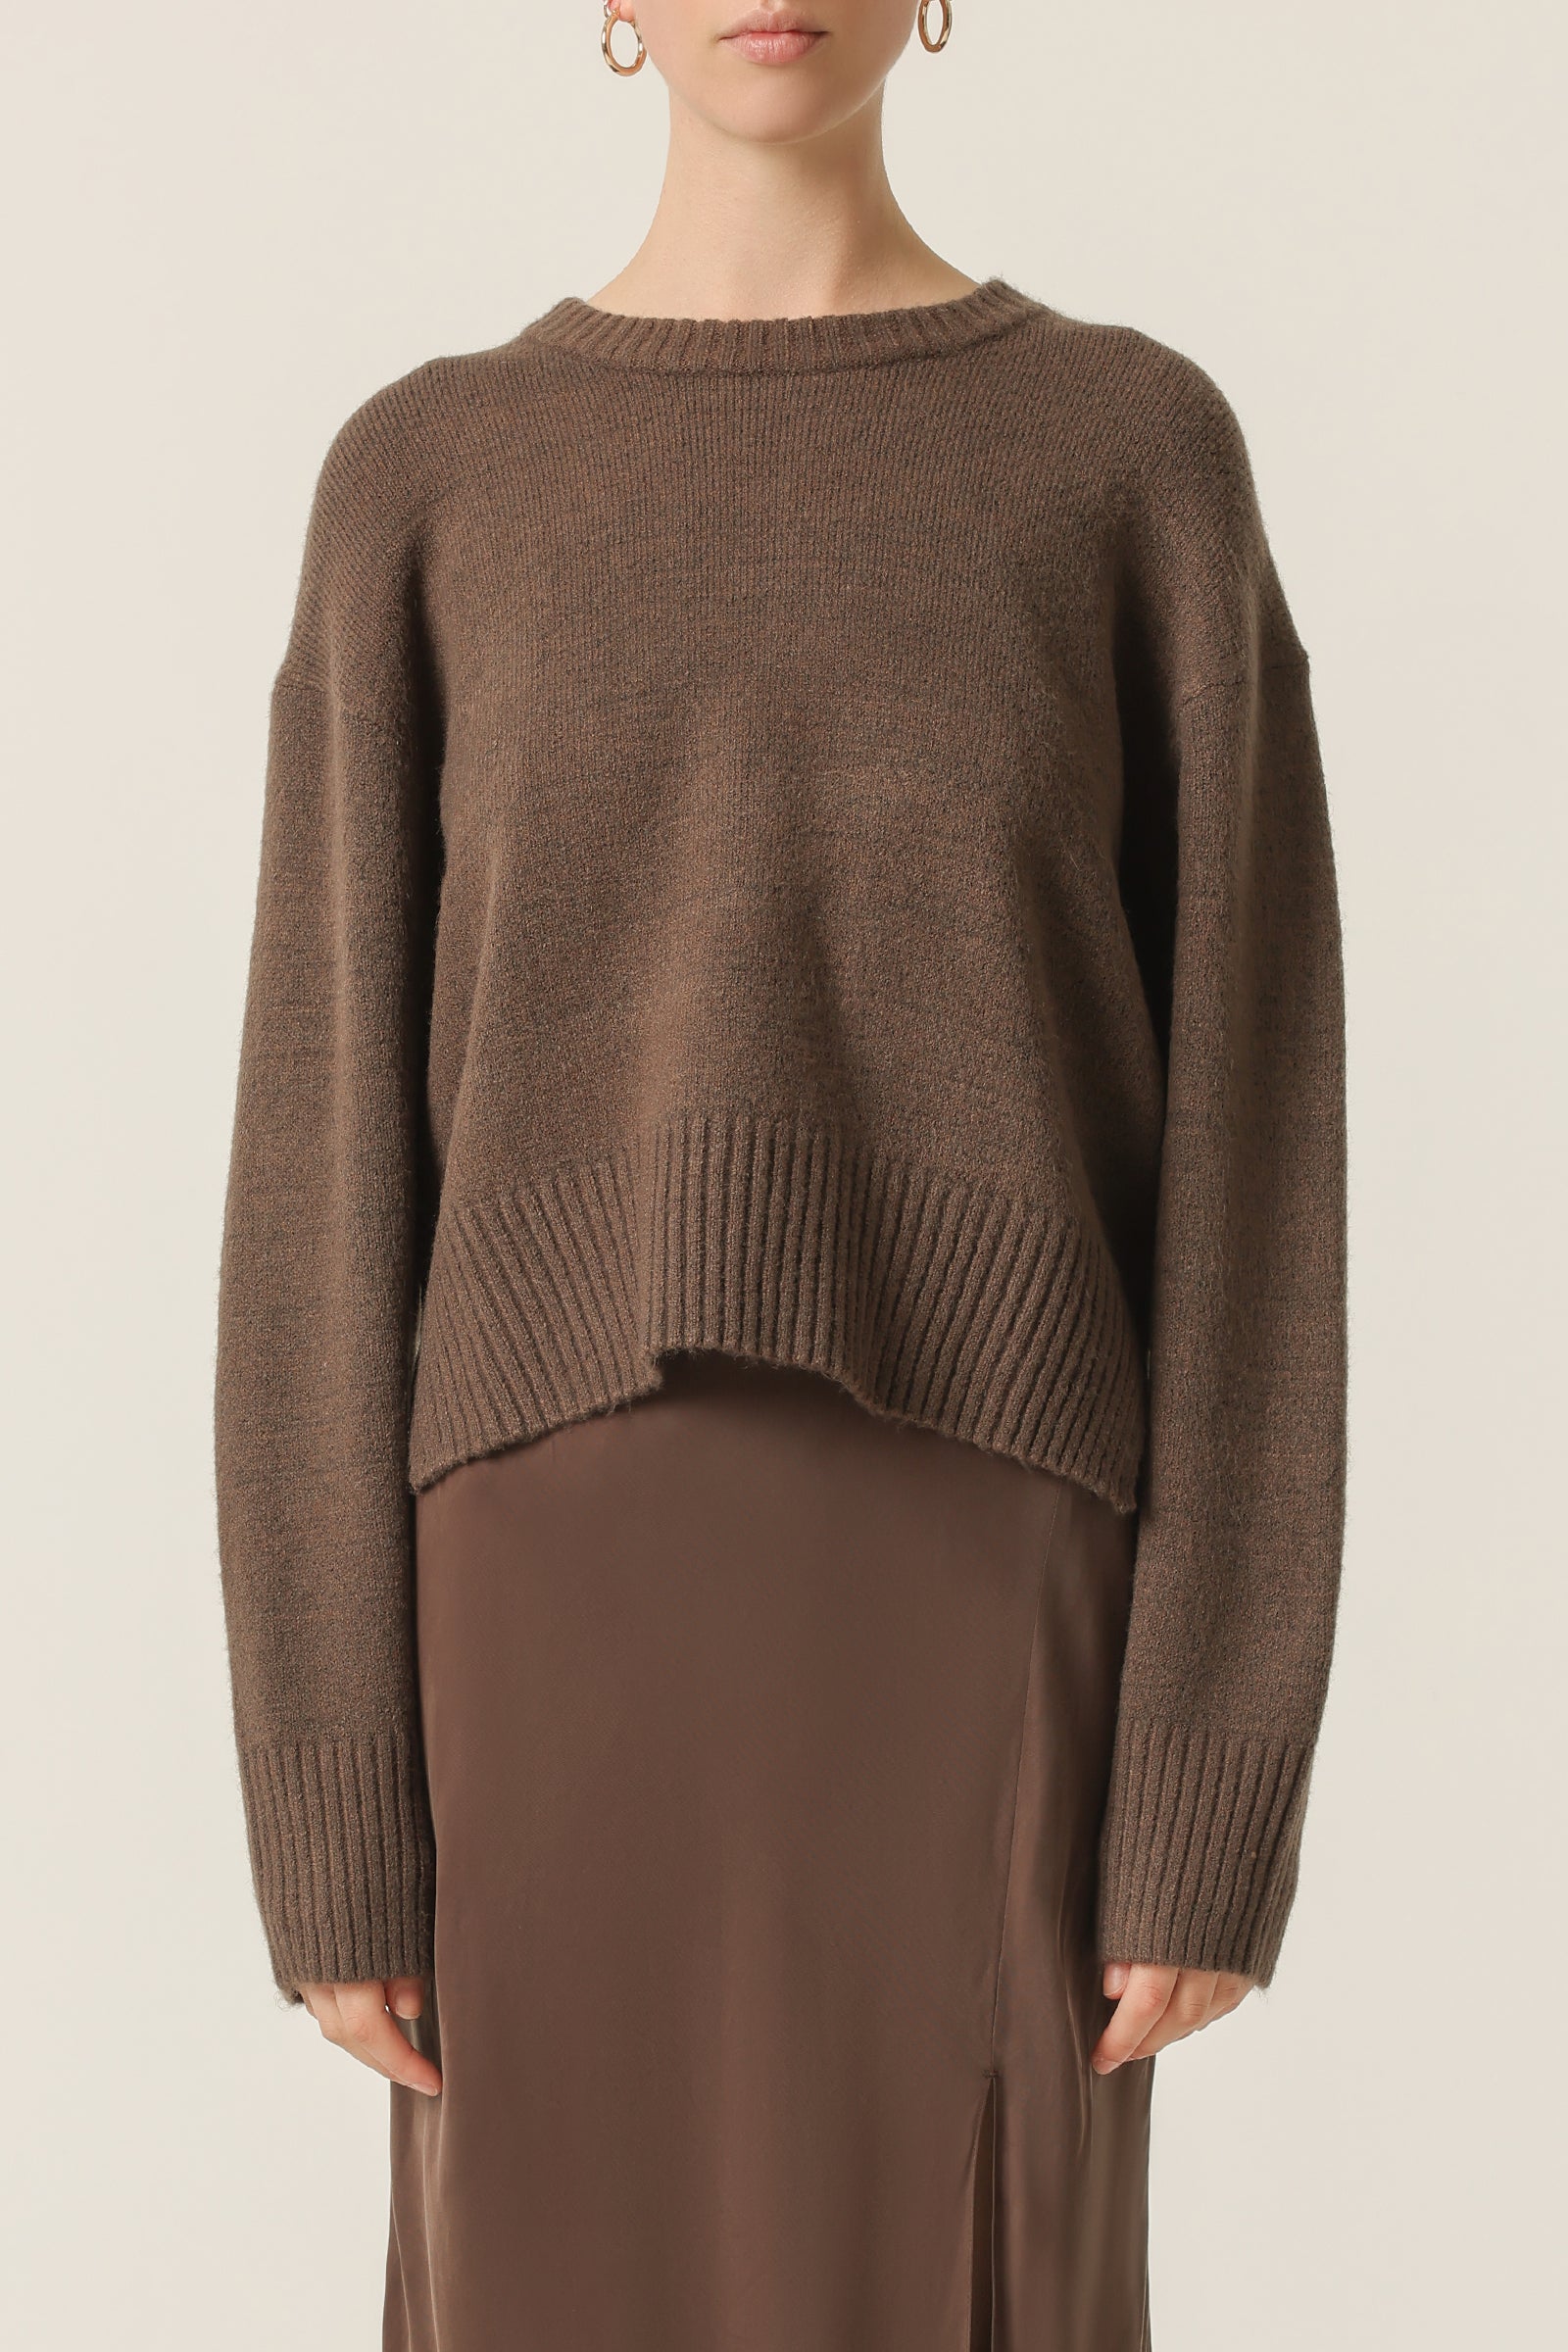 Nude Lucy Finley Knit In a Deep Brown Bark Colour 